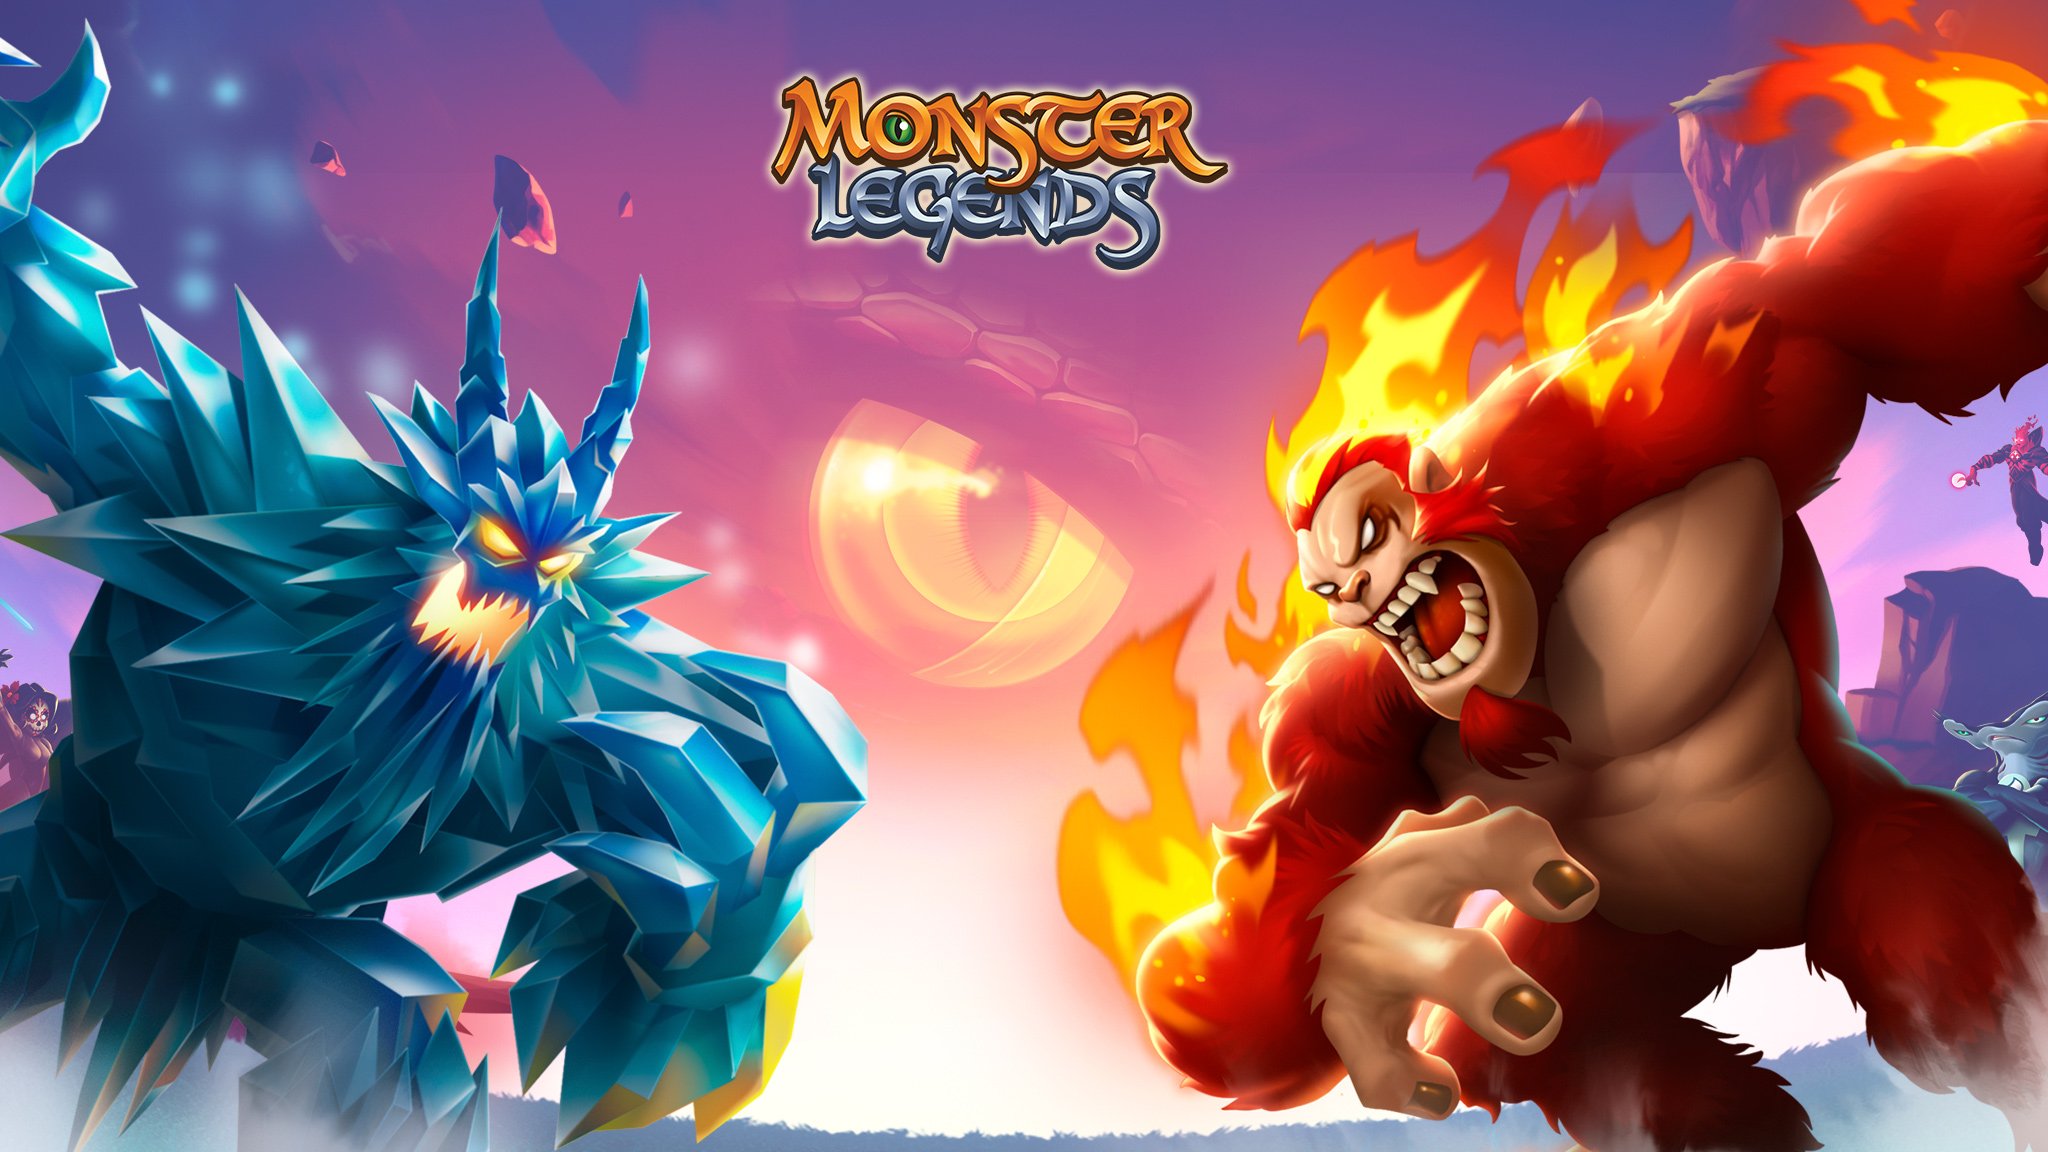 That means go check out Monster Legends in Dinosaur. uwu. 